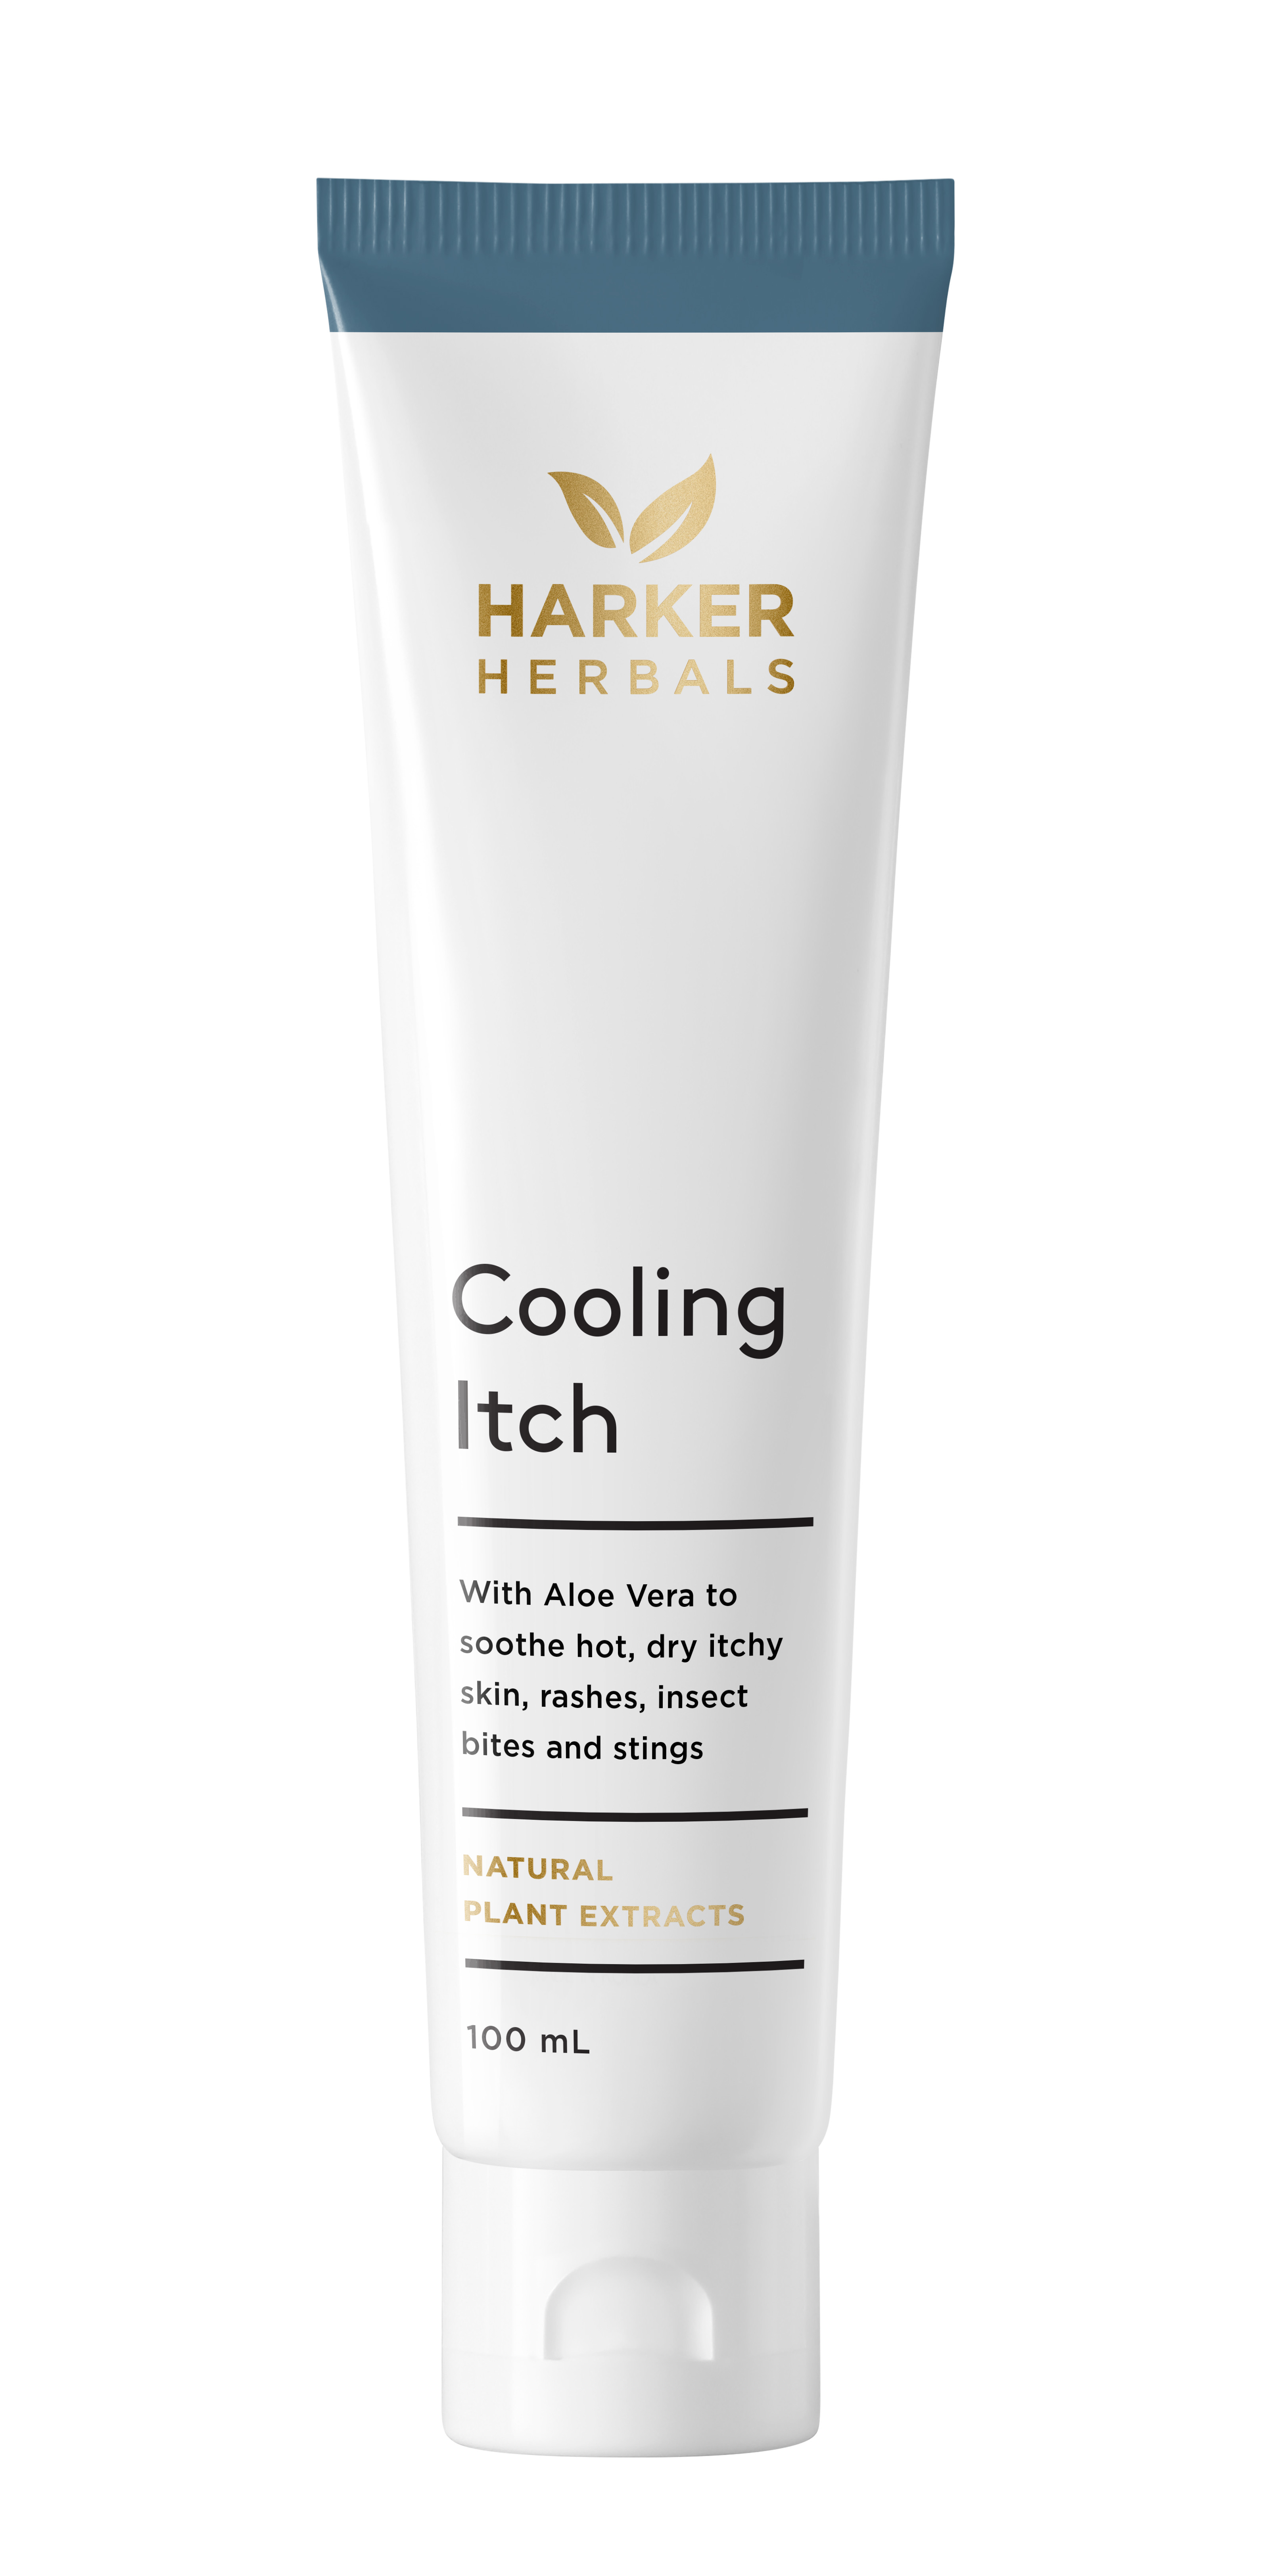 Harker Herbals Cooling Itch 100ml 